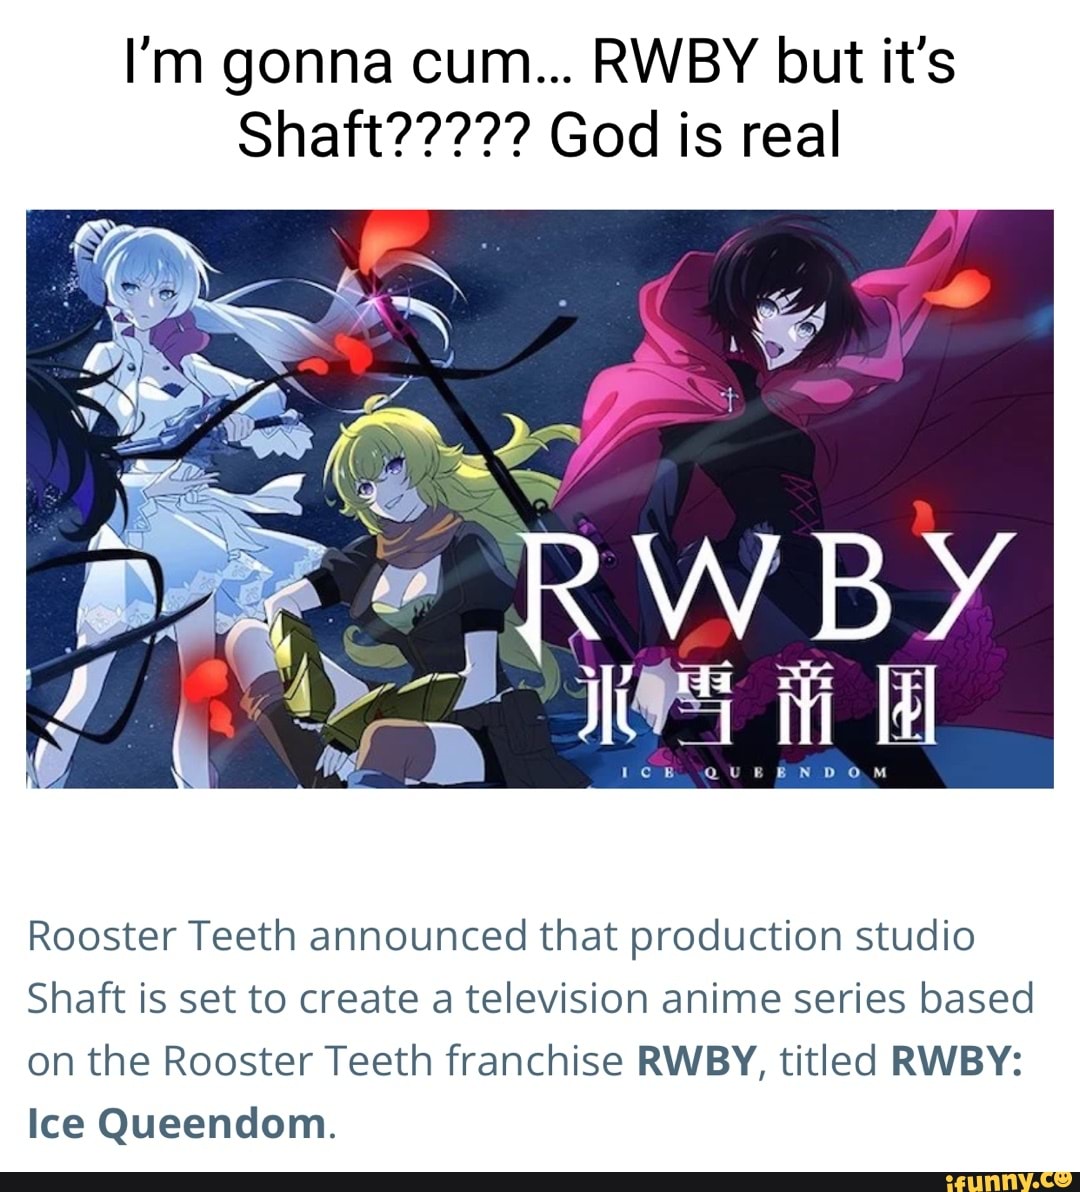 Justice League x RWBY' Animated Movie Reveals Plot and Voice Cast